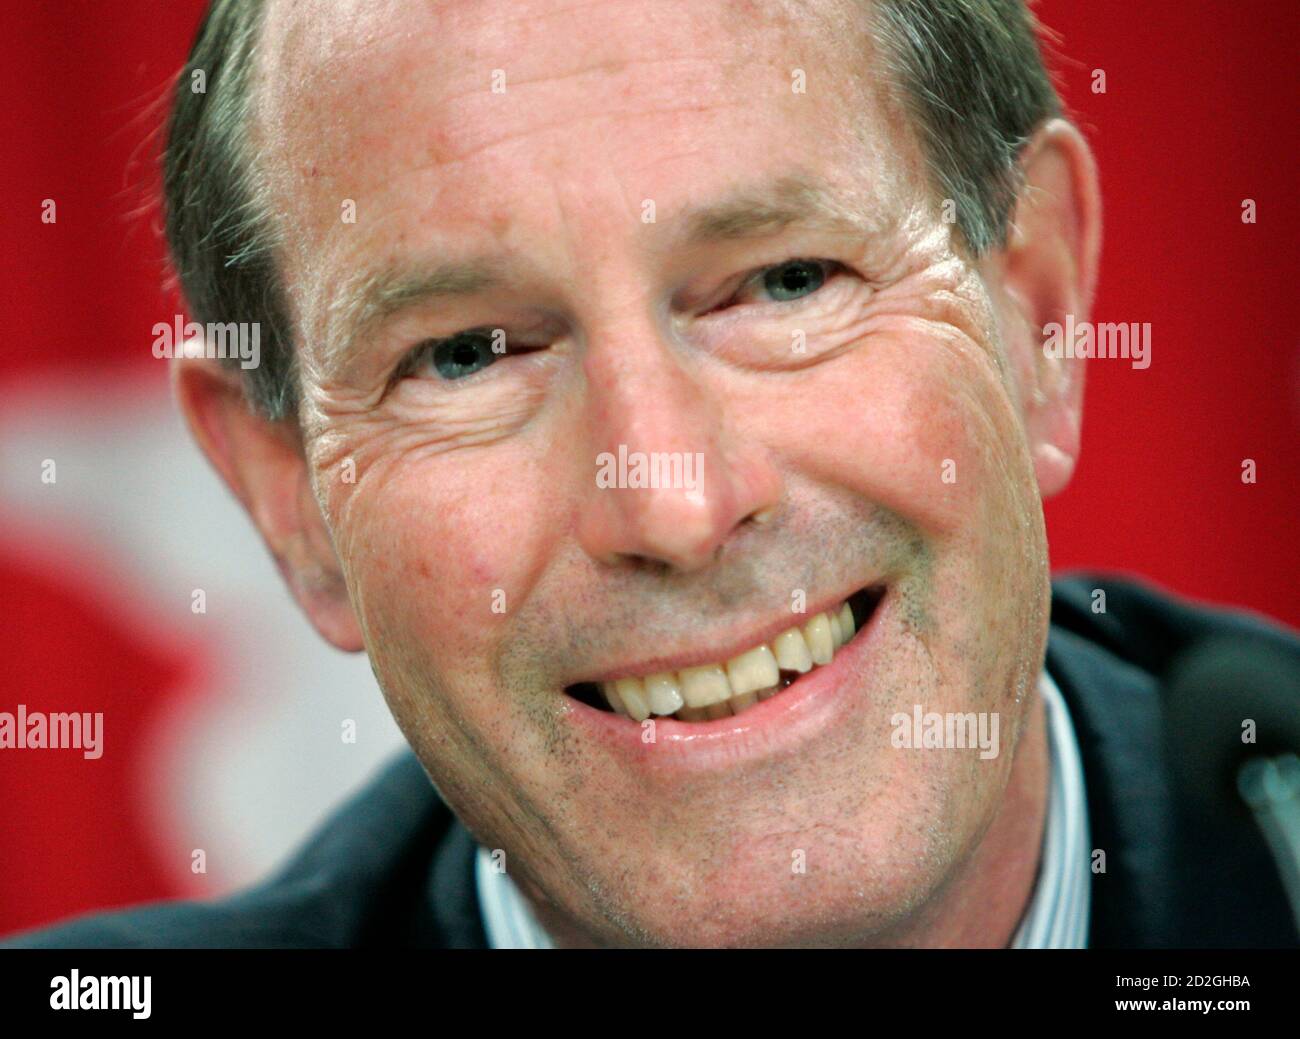 Bank of Canada Governor David Dodge reacts while speaking during a news conference upon the release of the Monetary Policy Report in Ottawa July 12, 2007.        REUTERS/Chris Wattie   (CANADA) Stock Photo